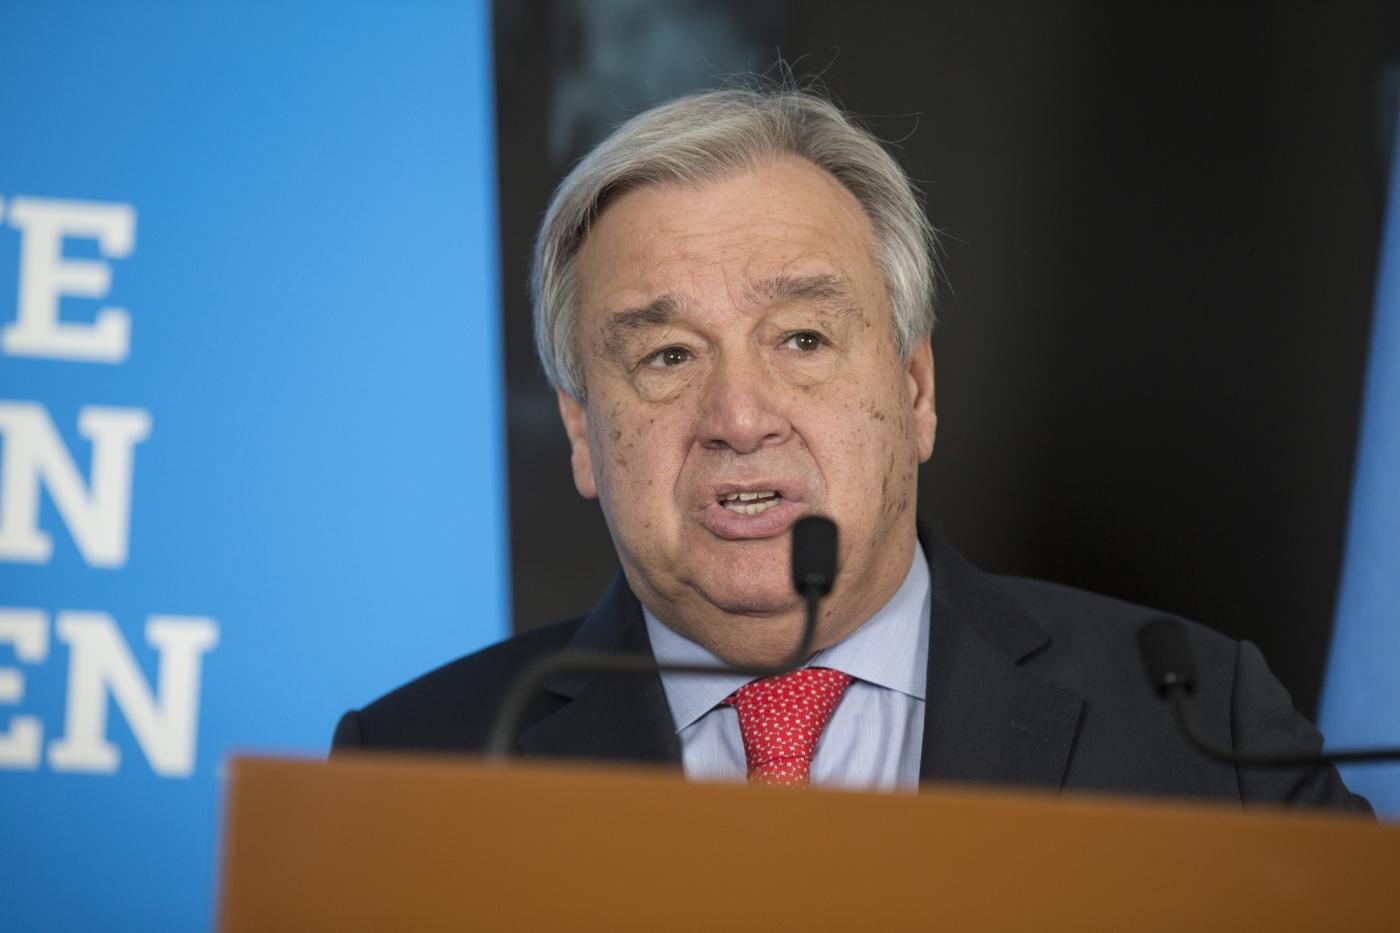 GENEVA, Feb. 26. 2019 (Xinhua) -- United Nations Secretary-General Antonio Guterres delivers a speech after the High-Level Pledging Event for the Humanitarian Crisis in Yemen in Geneva, Switzerland, on Feb. 26, 2019. United Nations Secretary-General Antonio Guterres on Tuesday described the pledging conference for humanitarian aid for war-plagued Yemen a "success" after donation assurances reached 2.6 billion U.S. dollars, up from 2 billion U.S. dollars in 2018. (Xinhua/Xu Jinquan/IANS) by .